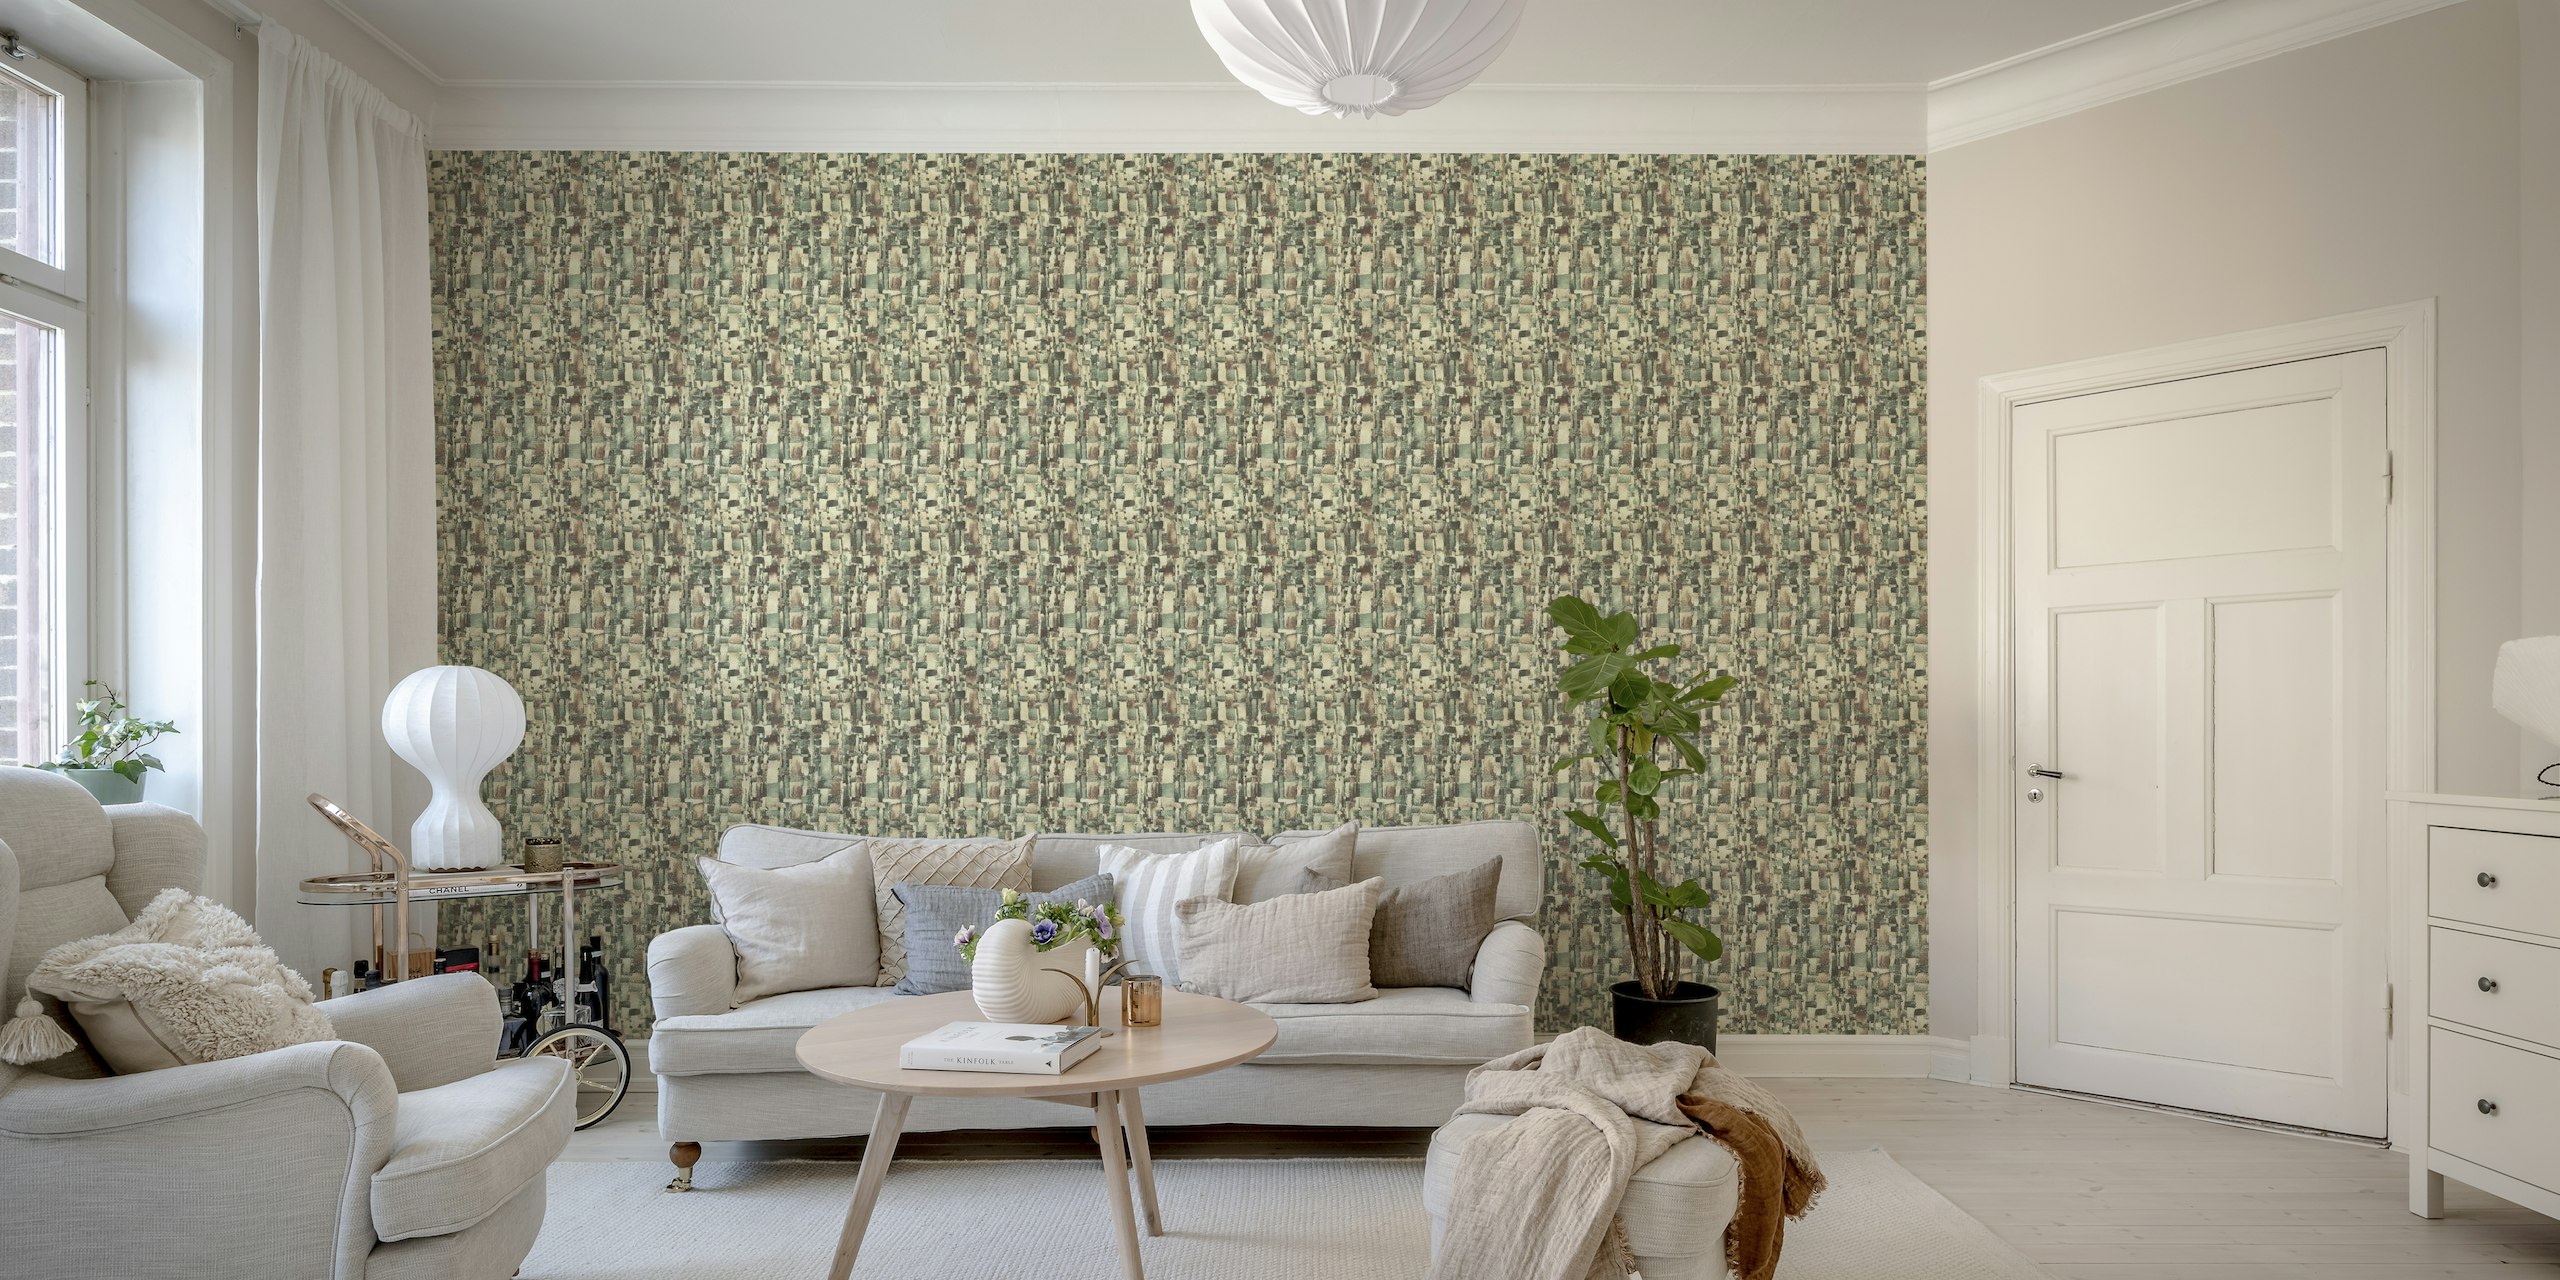 Abstract wall mural in beige with soft pastel textures and patterns.